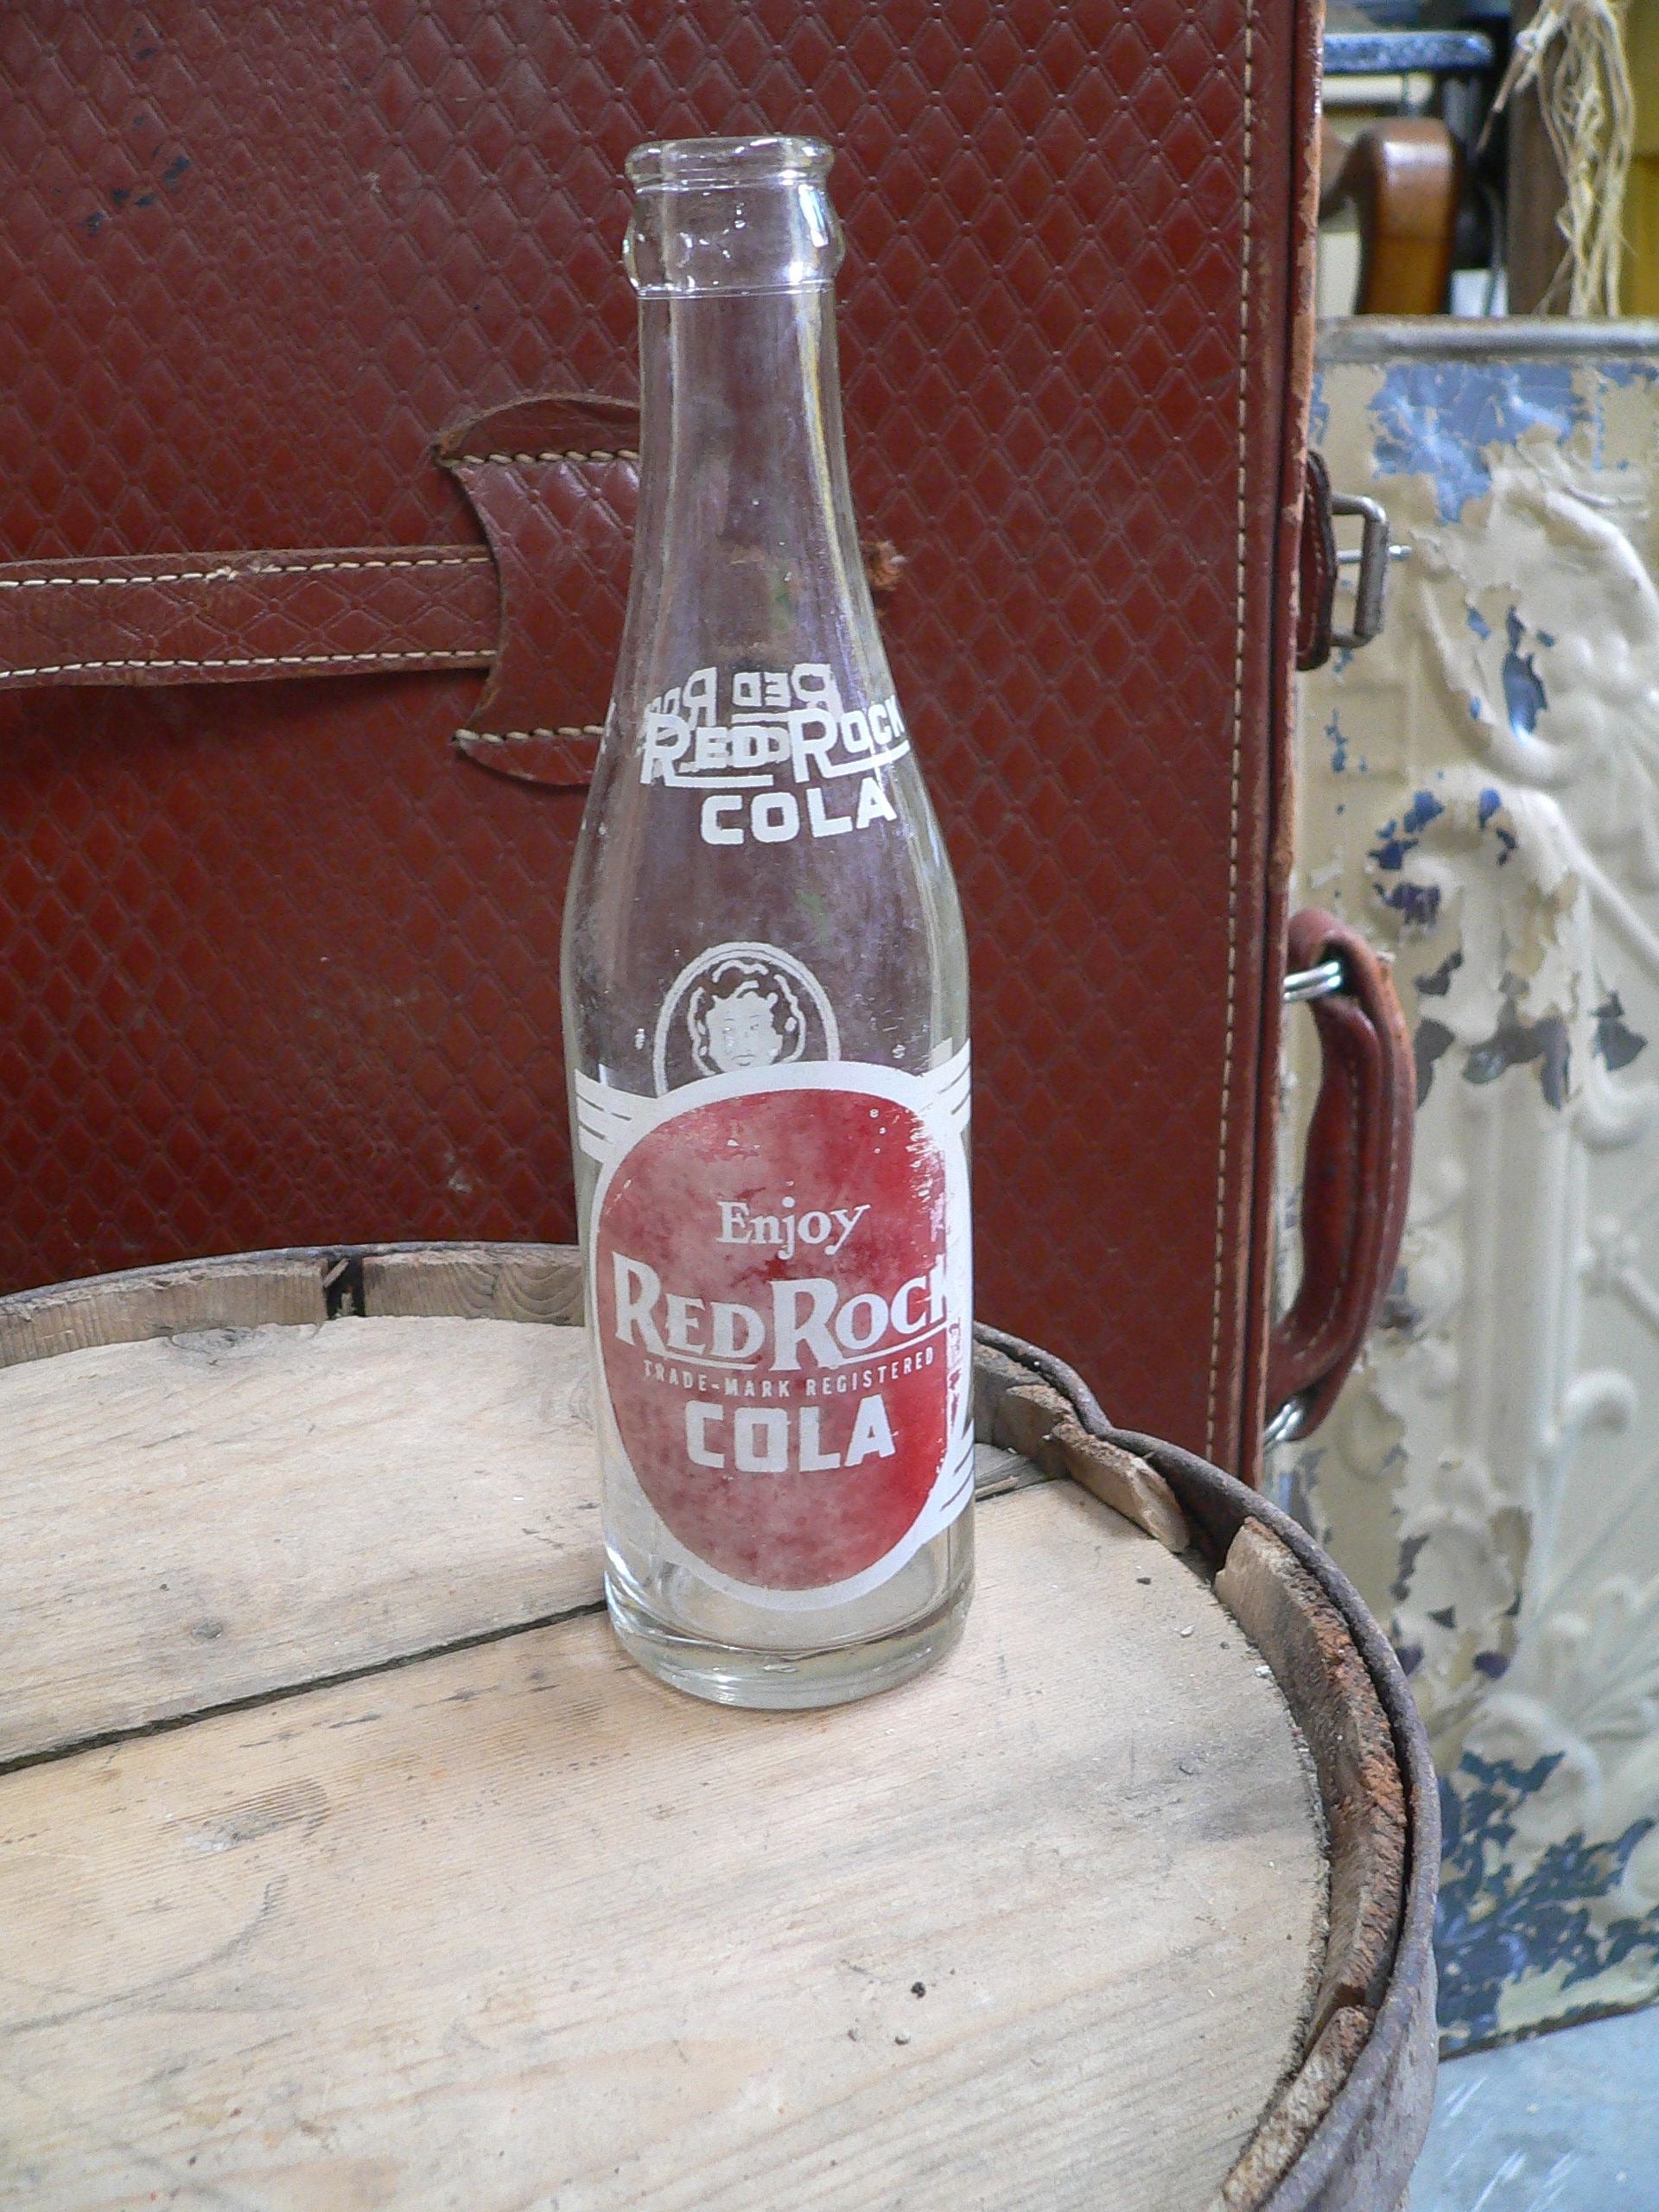 Bouteille antique red rock cola # 7231.5